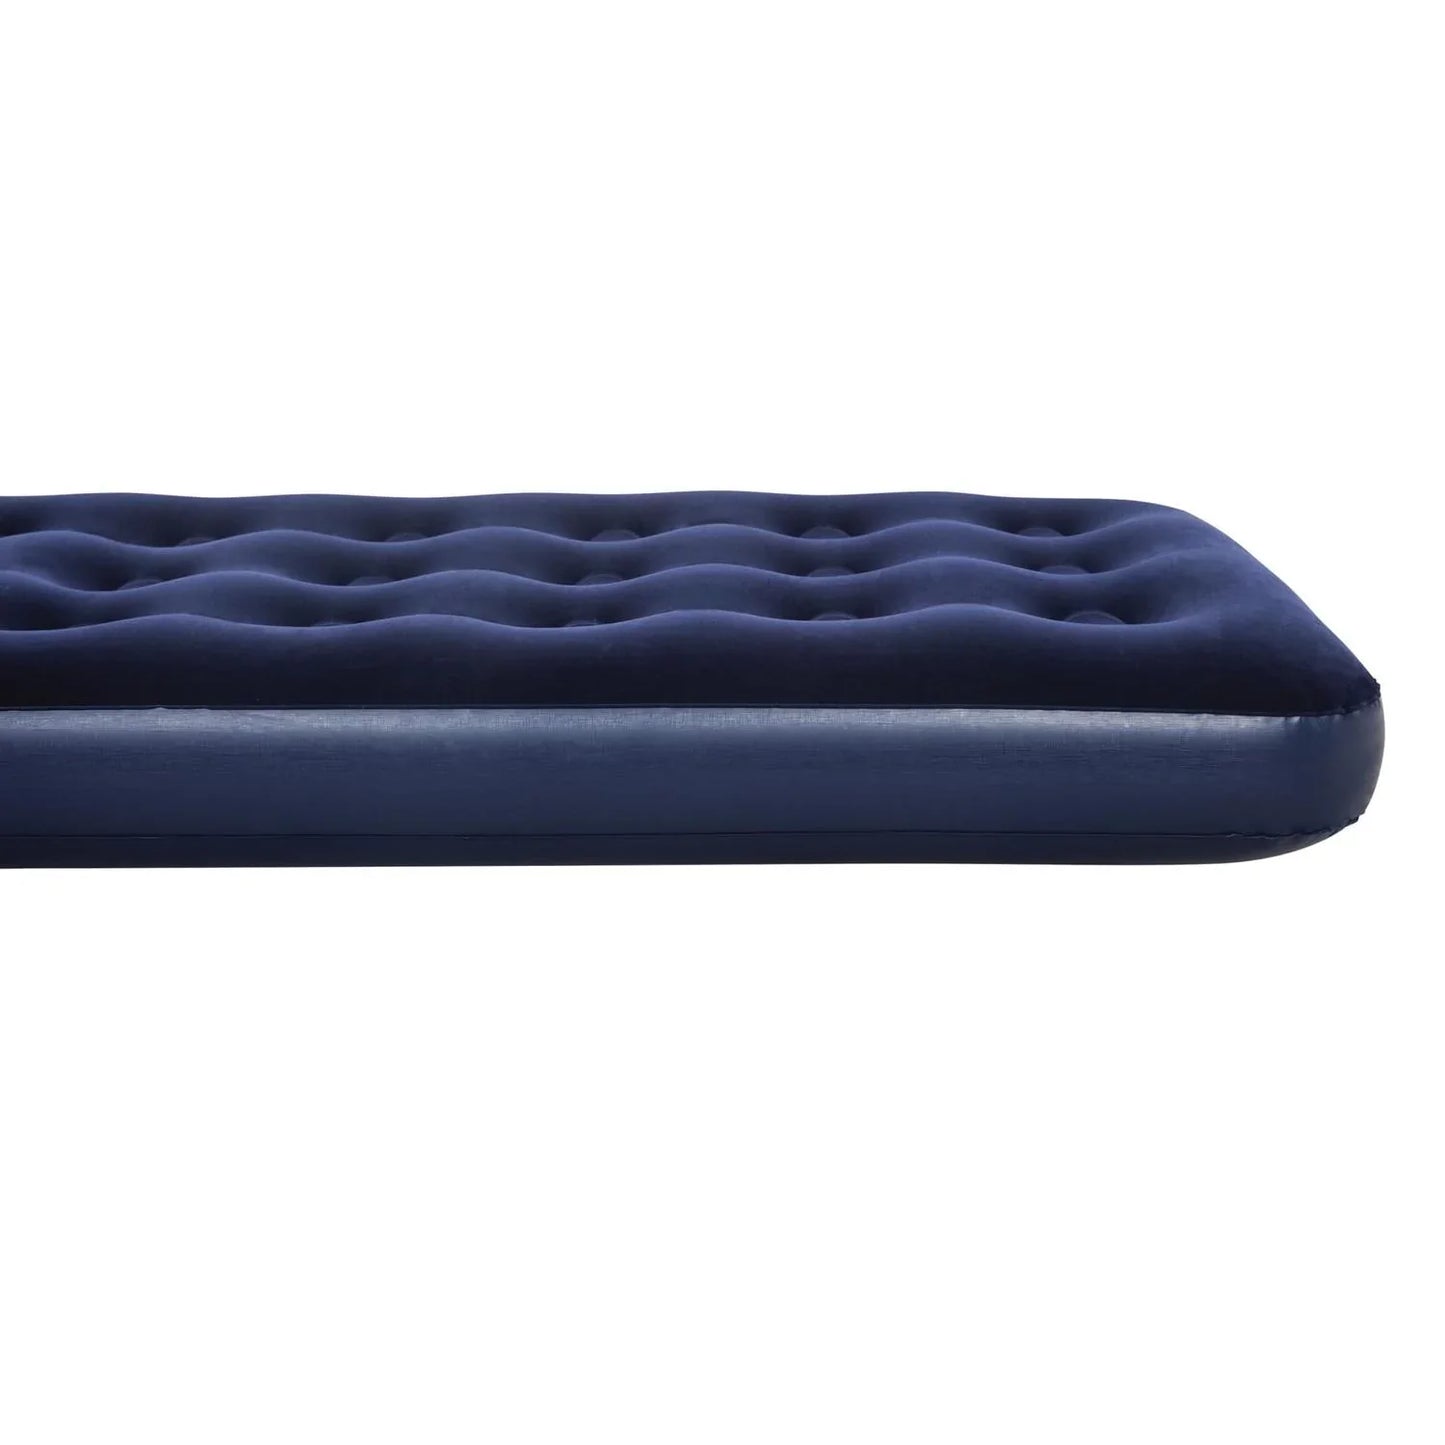 Beds Bestway Pavillo Single Flocked Airbed Blue